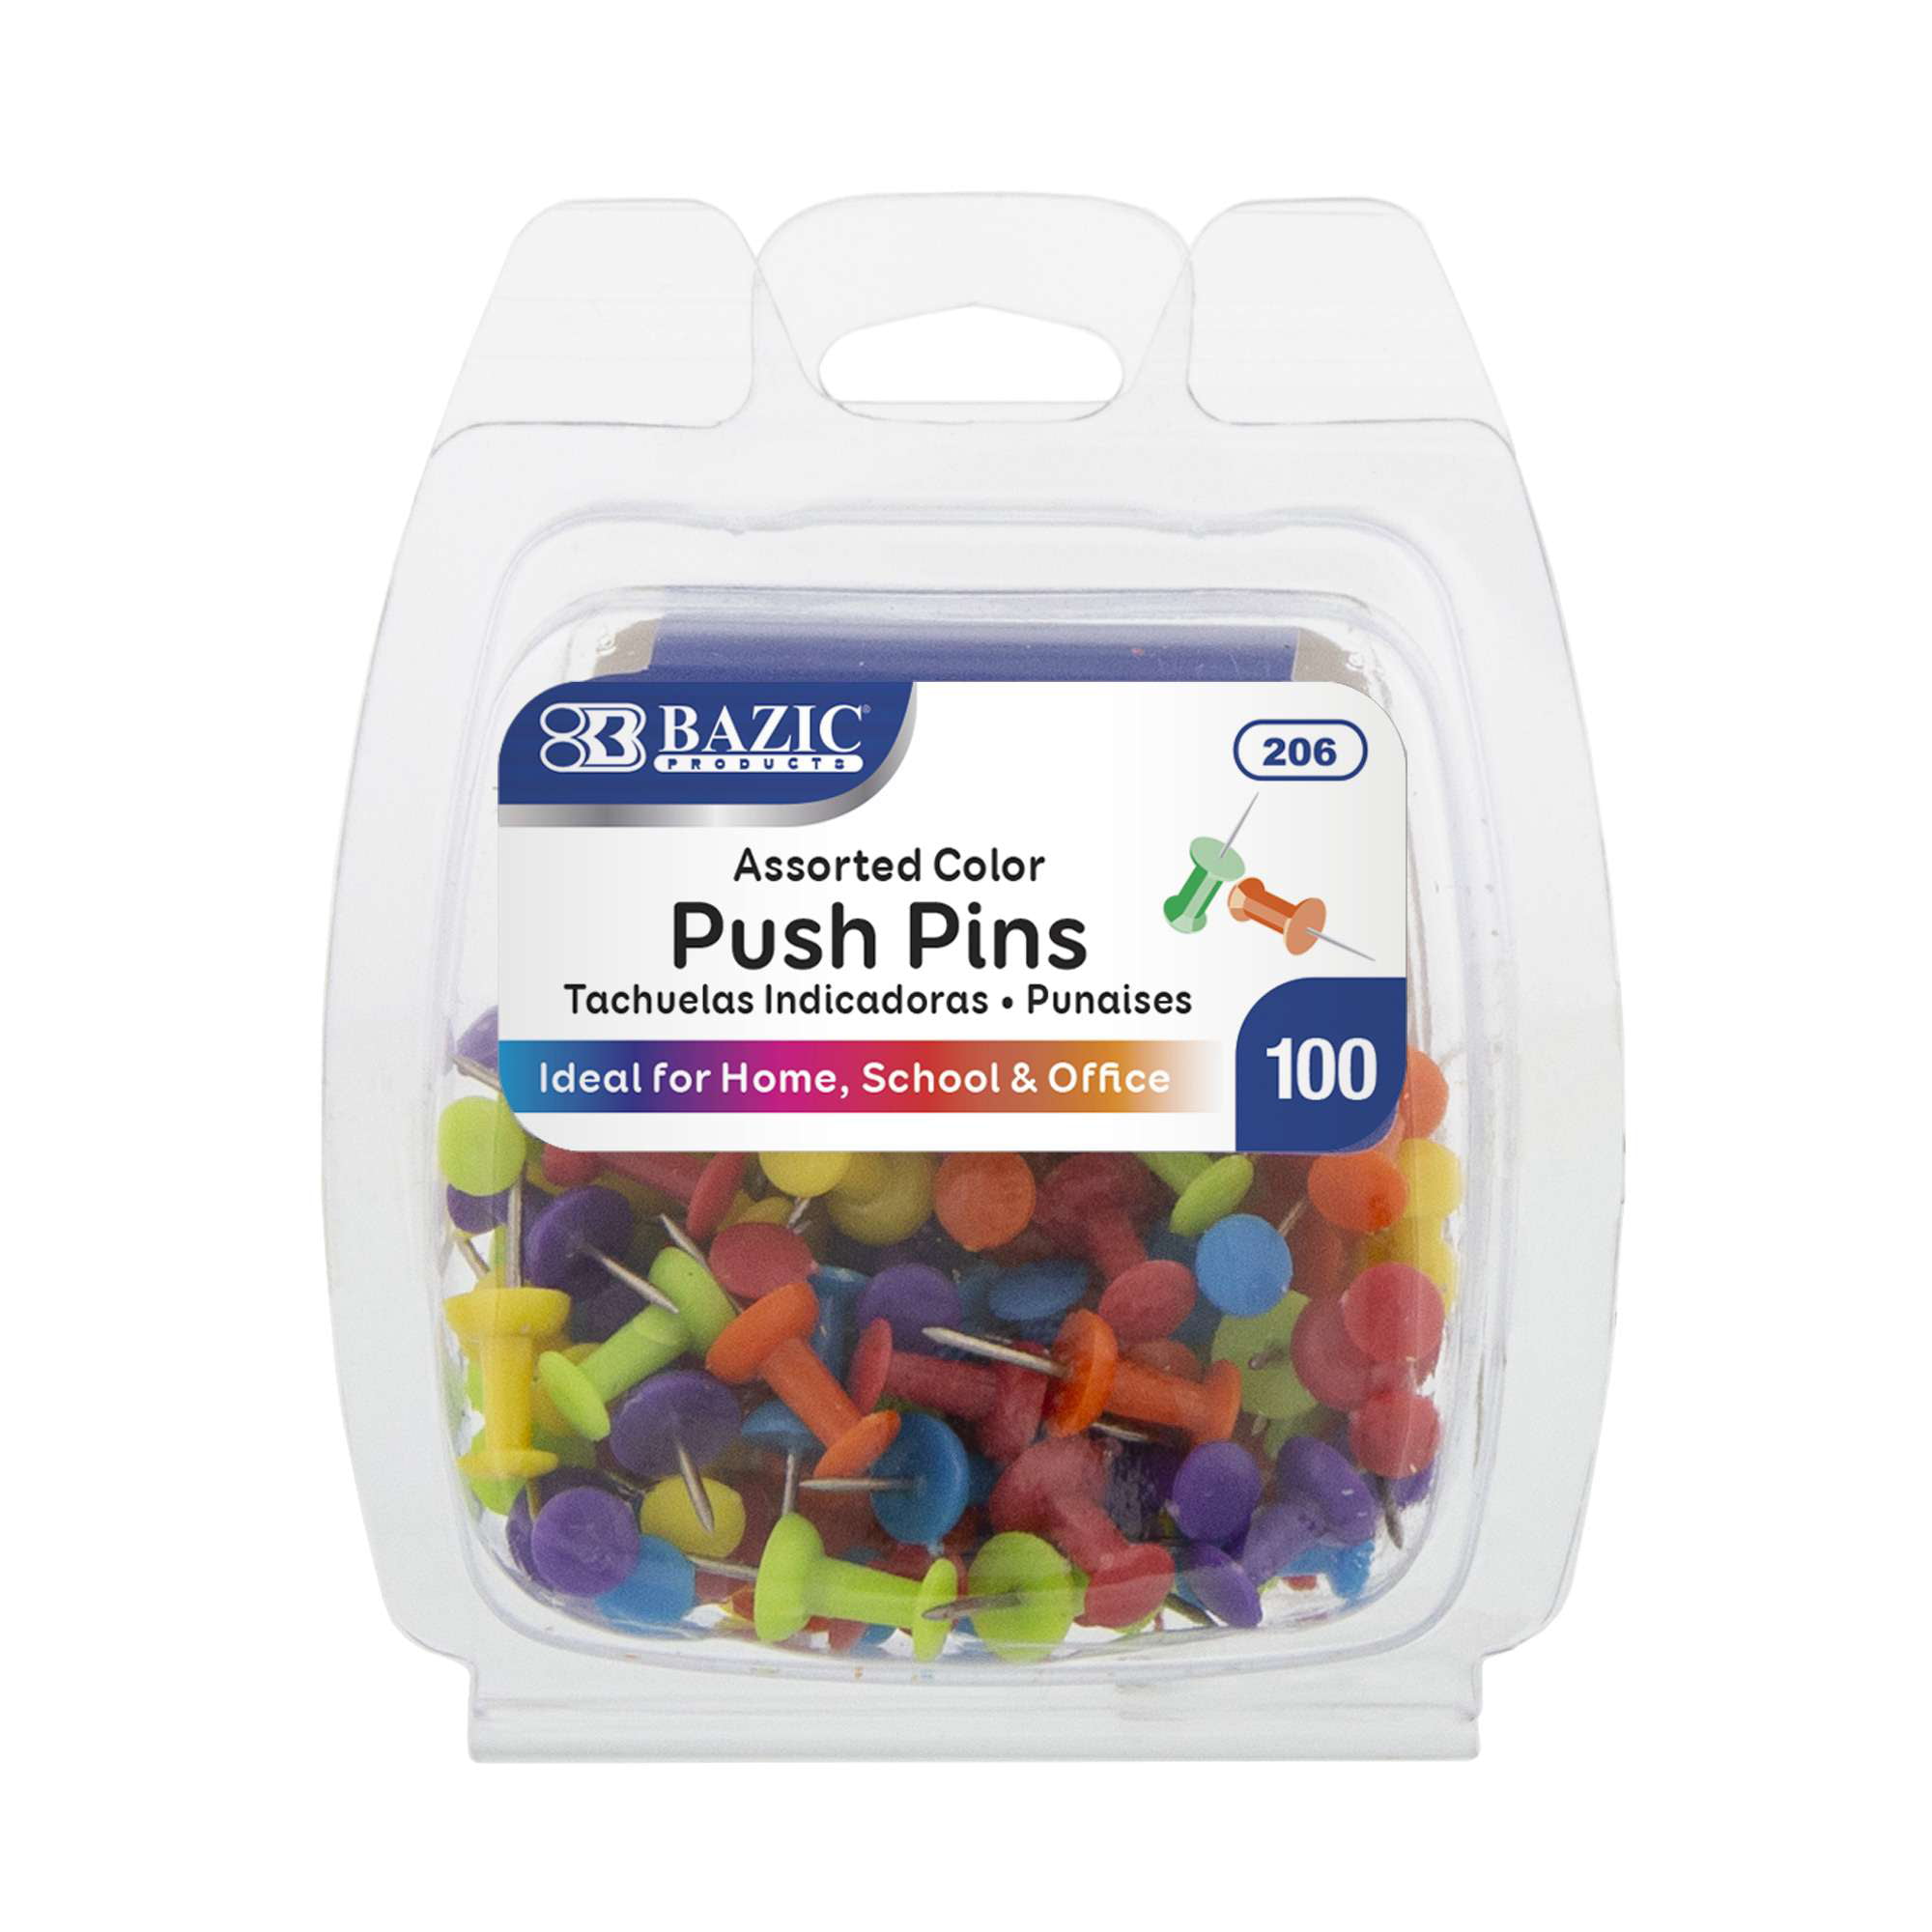 100 PCS Push Pin Pins Thumb Tack Multi Color Head For Office School Home Safety 